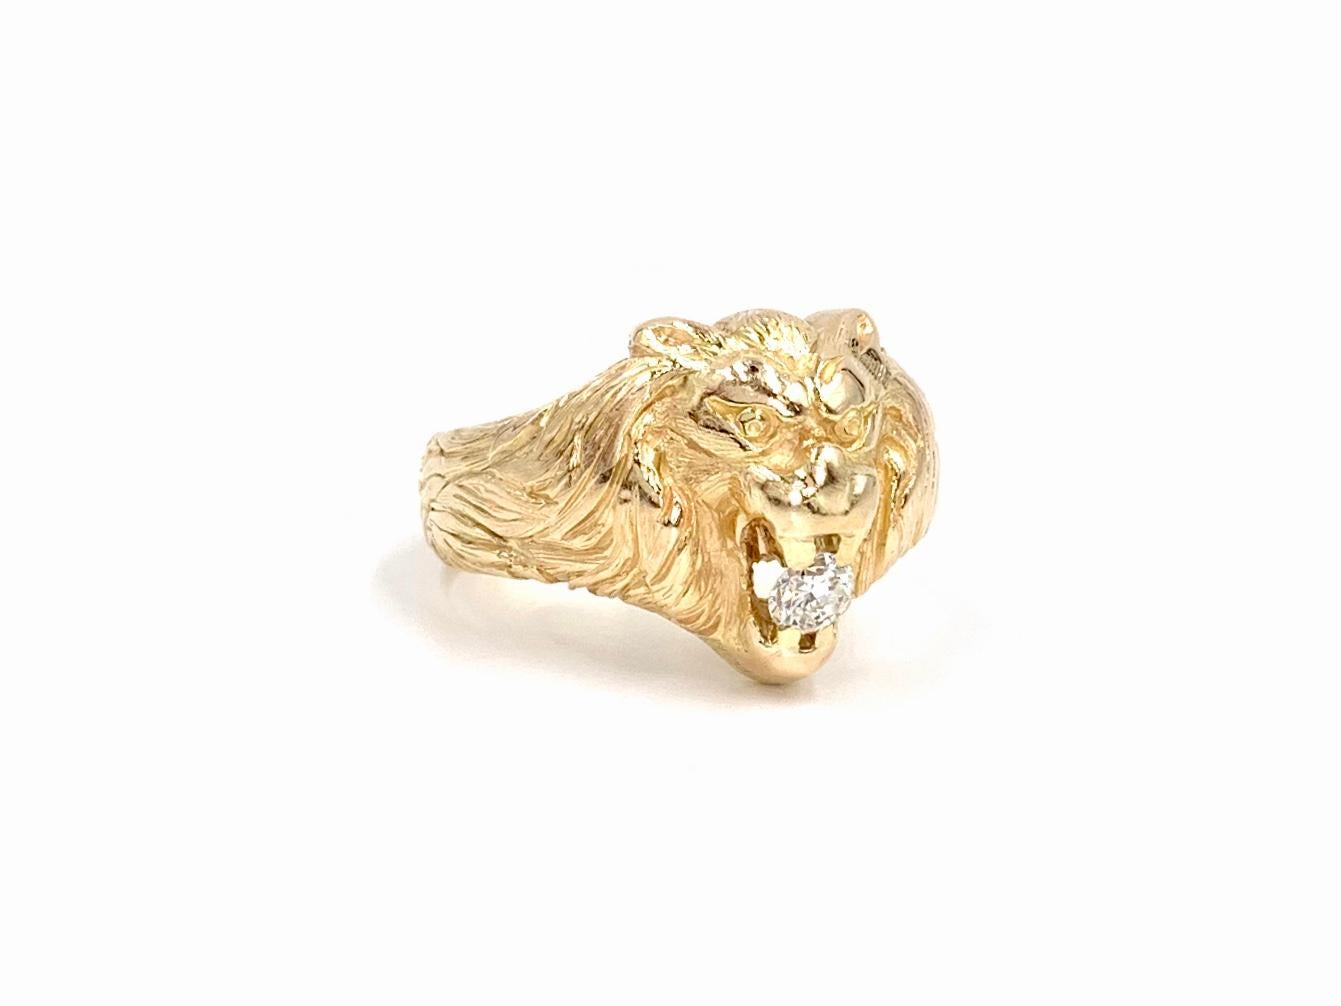 A roaring lion holds a sparkling round brilliant diamond between his teeth in this unique carved 18 karat yellow gold ring. Diamond is approximately .15 carats at approximately I color, VS2 clarity (eye clean). Lion head ring has a substantial